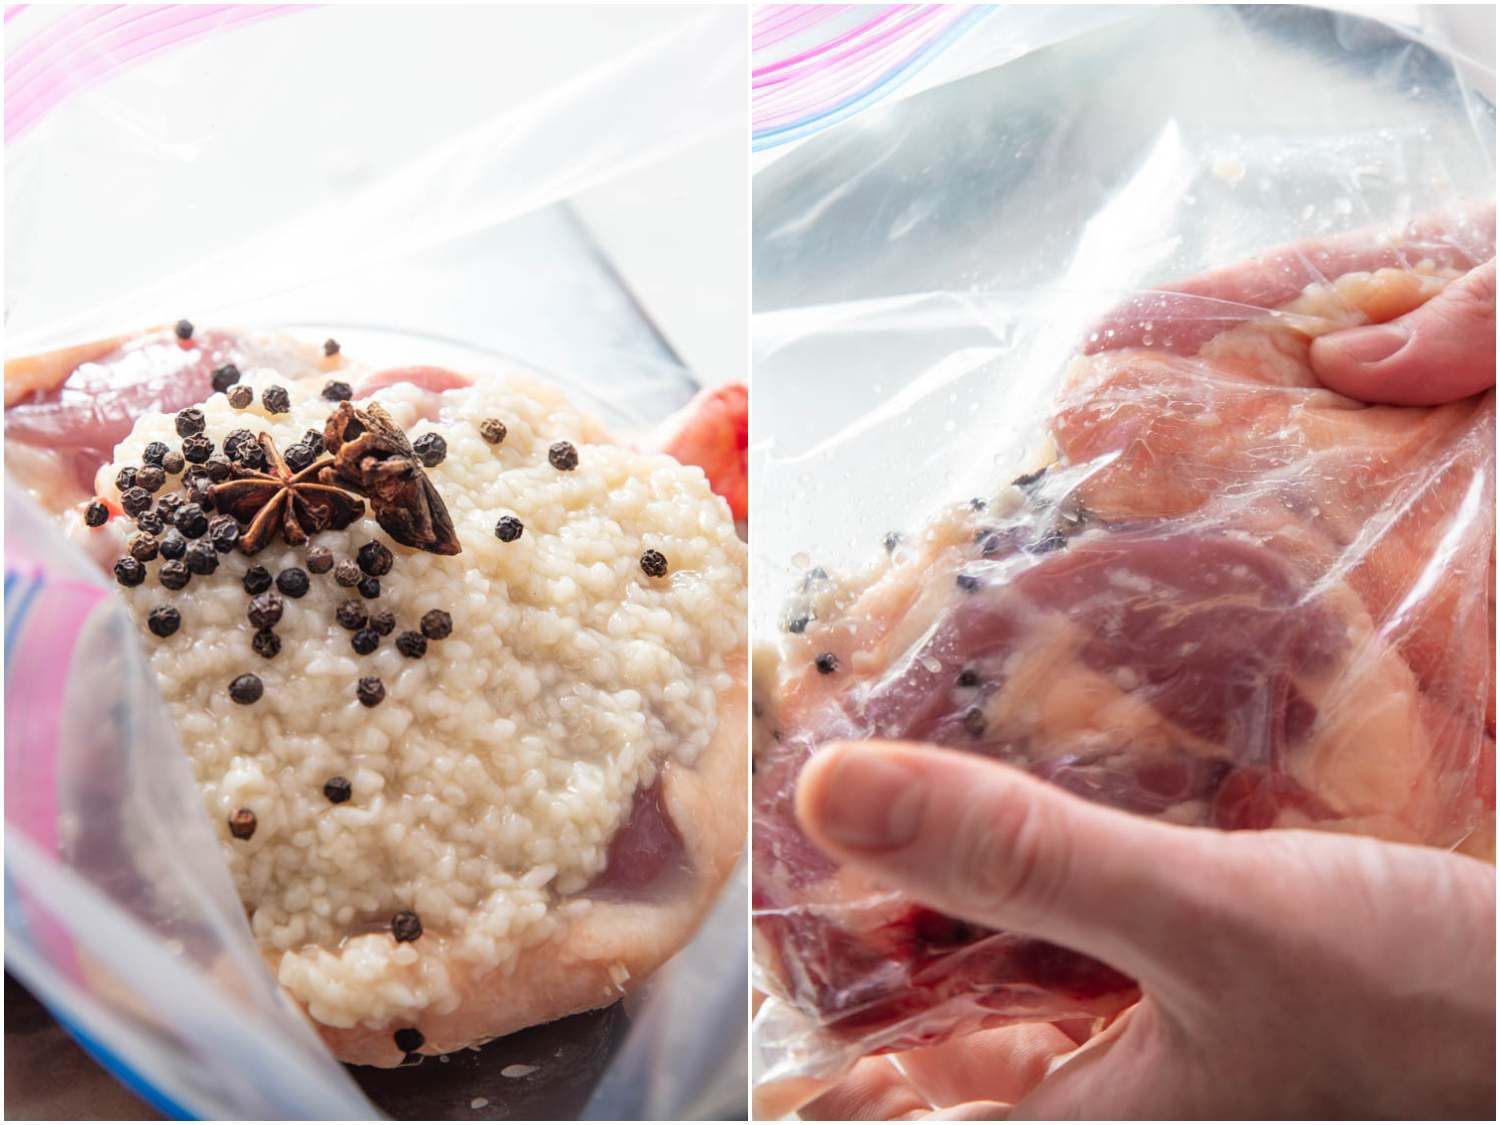 Photo collage of curing duck legs with shio koji, black peppercorns, and star anise in a zipper-lock bag.